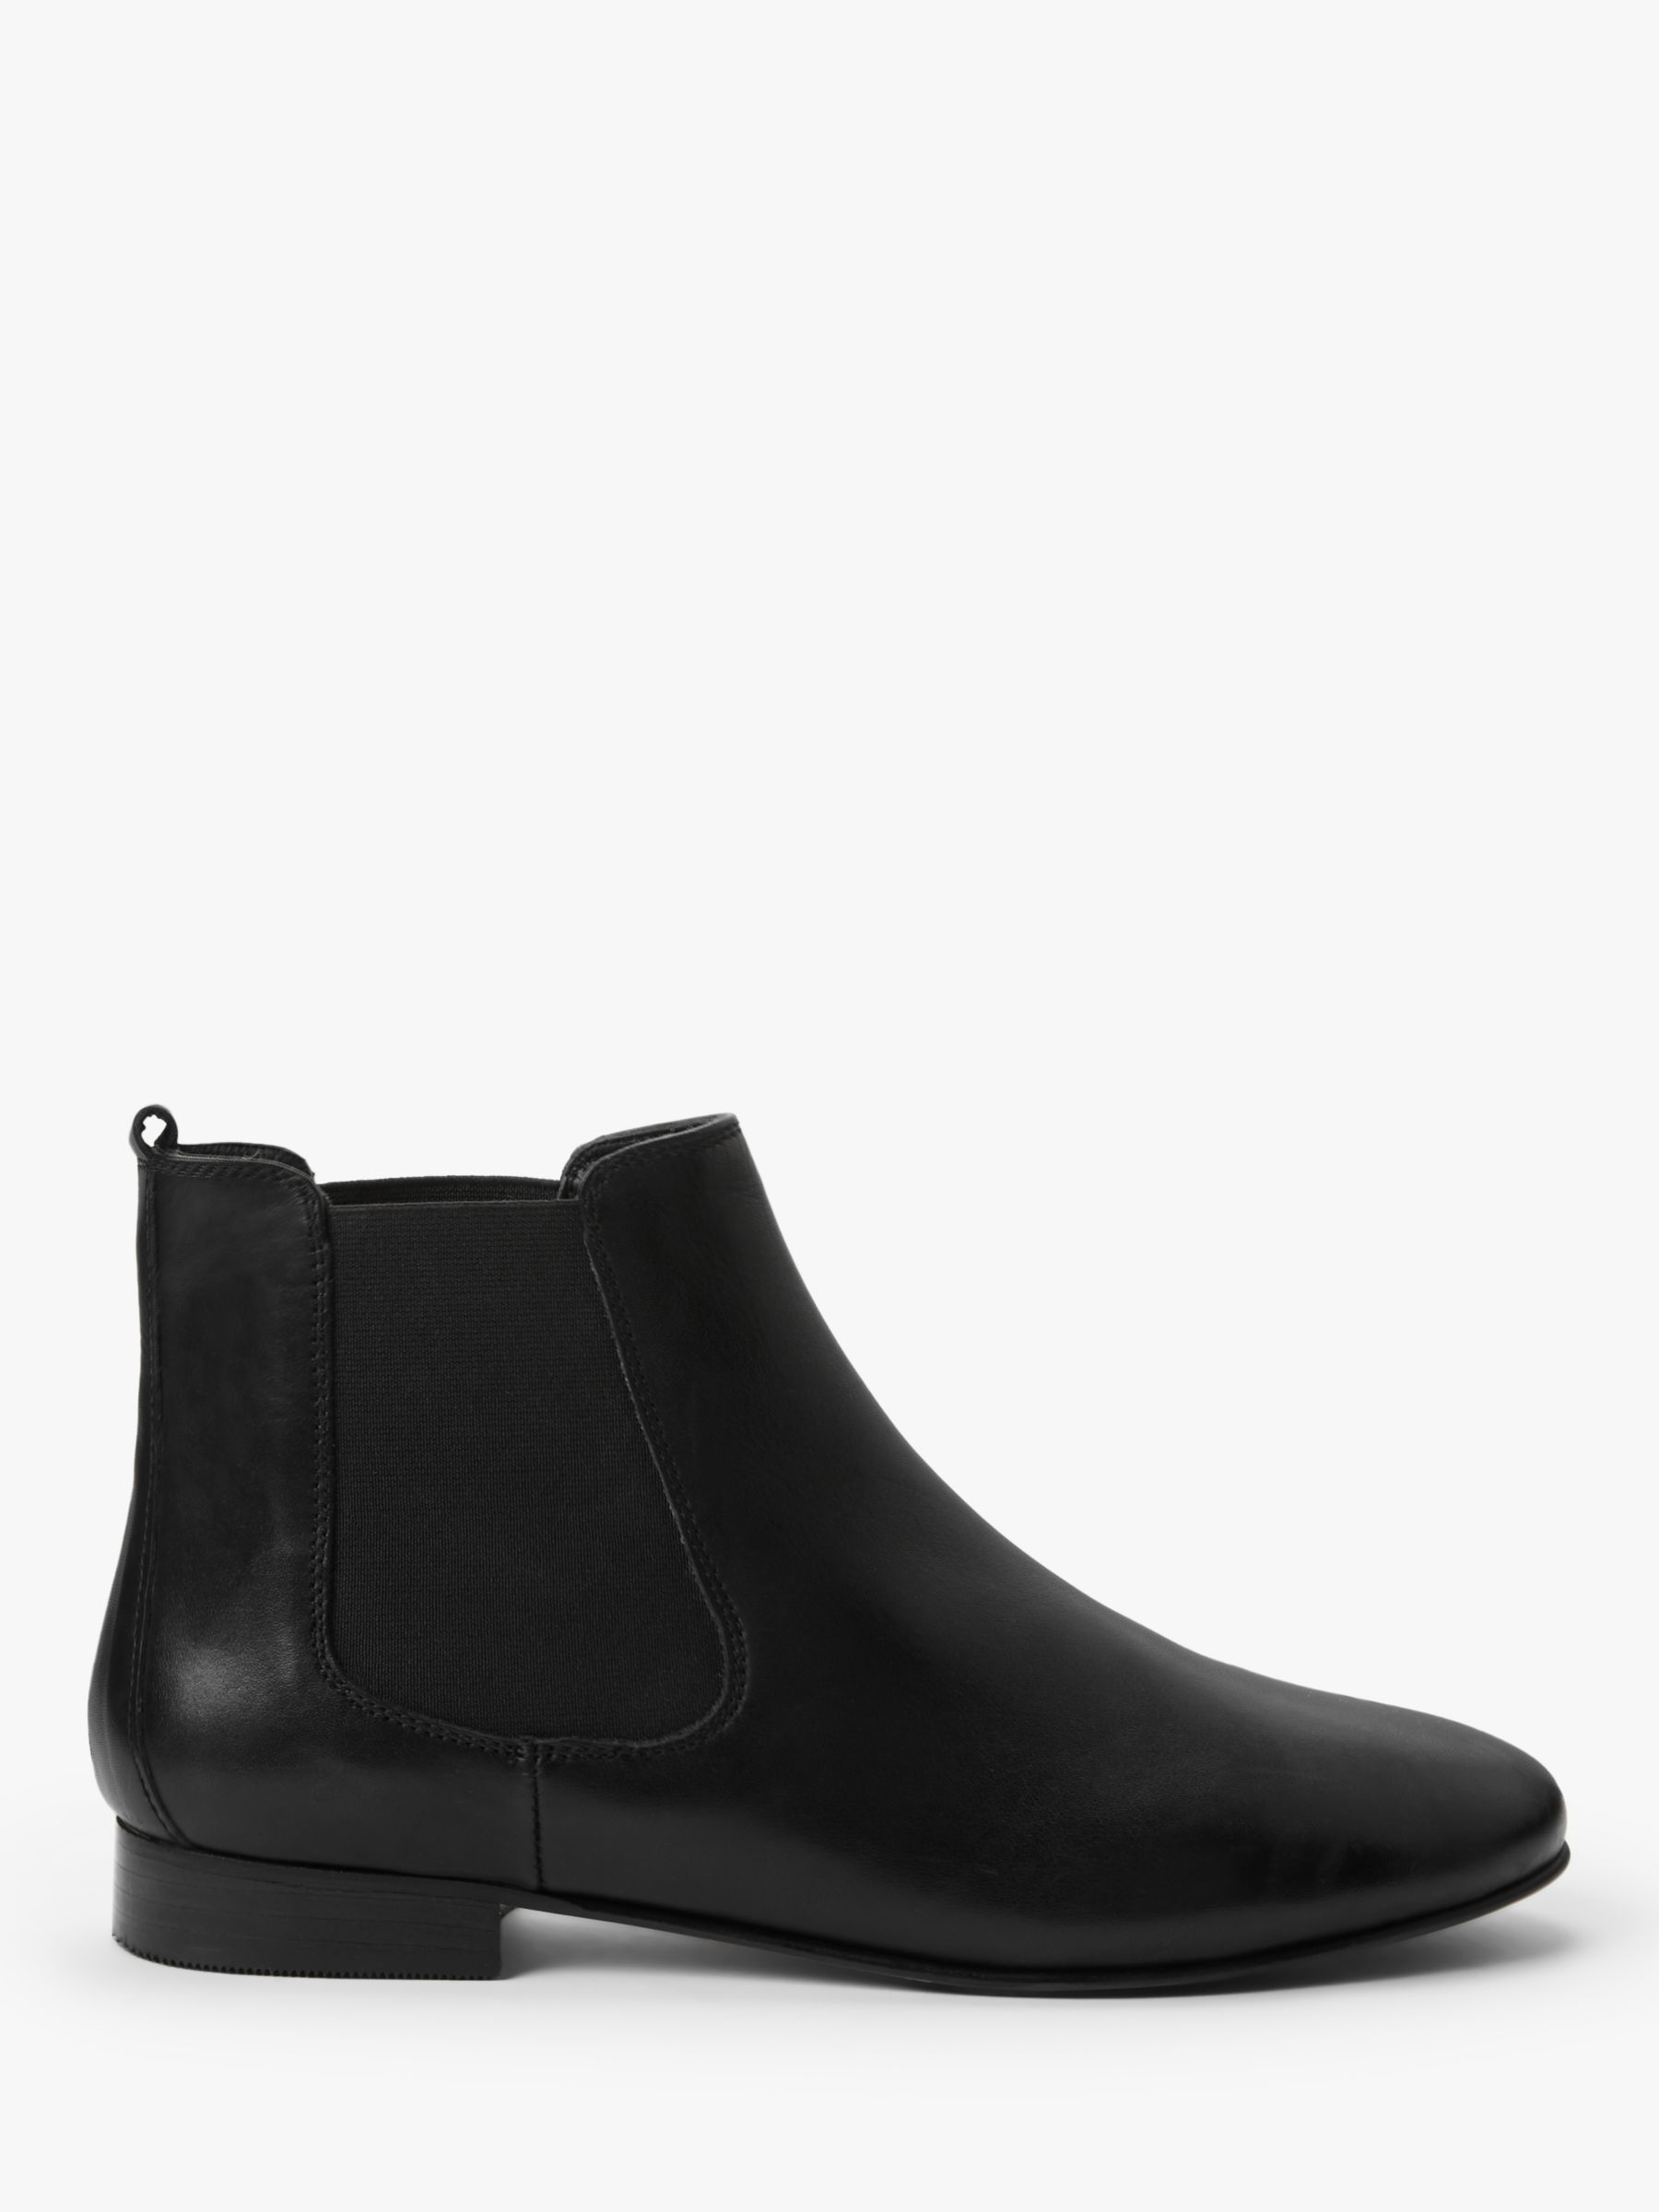 Boden Leaton Leather Chelsea Ankle Boots at John Lewis & Partners